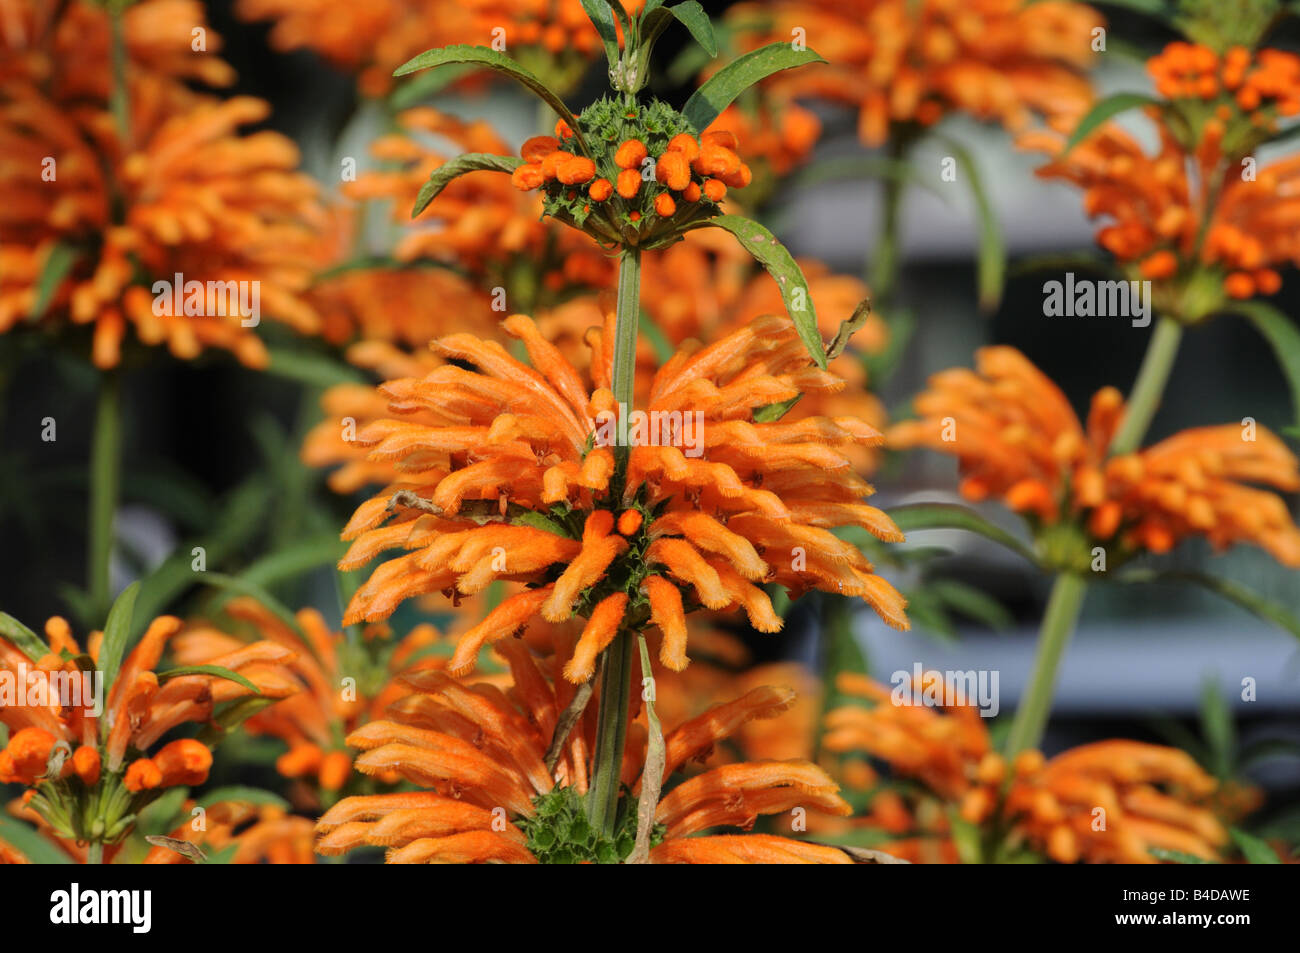 Leonotis leonurus or Lion's Ear, a plant from South Africa, flourishes in a garden in Lower Manhattan. Stock Photo